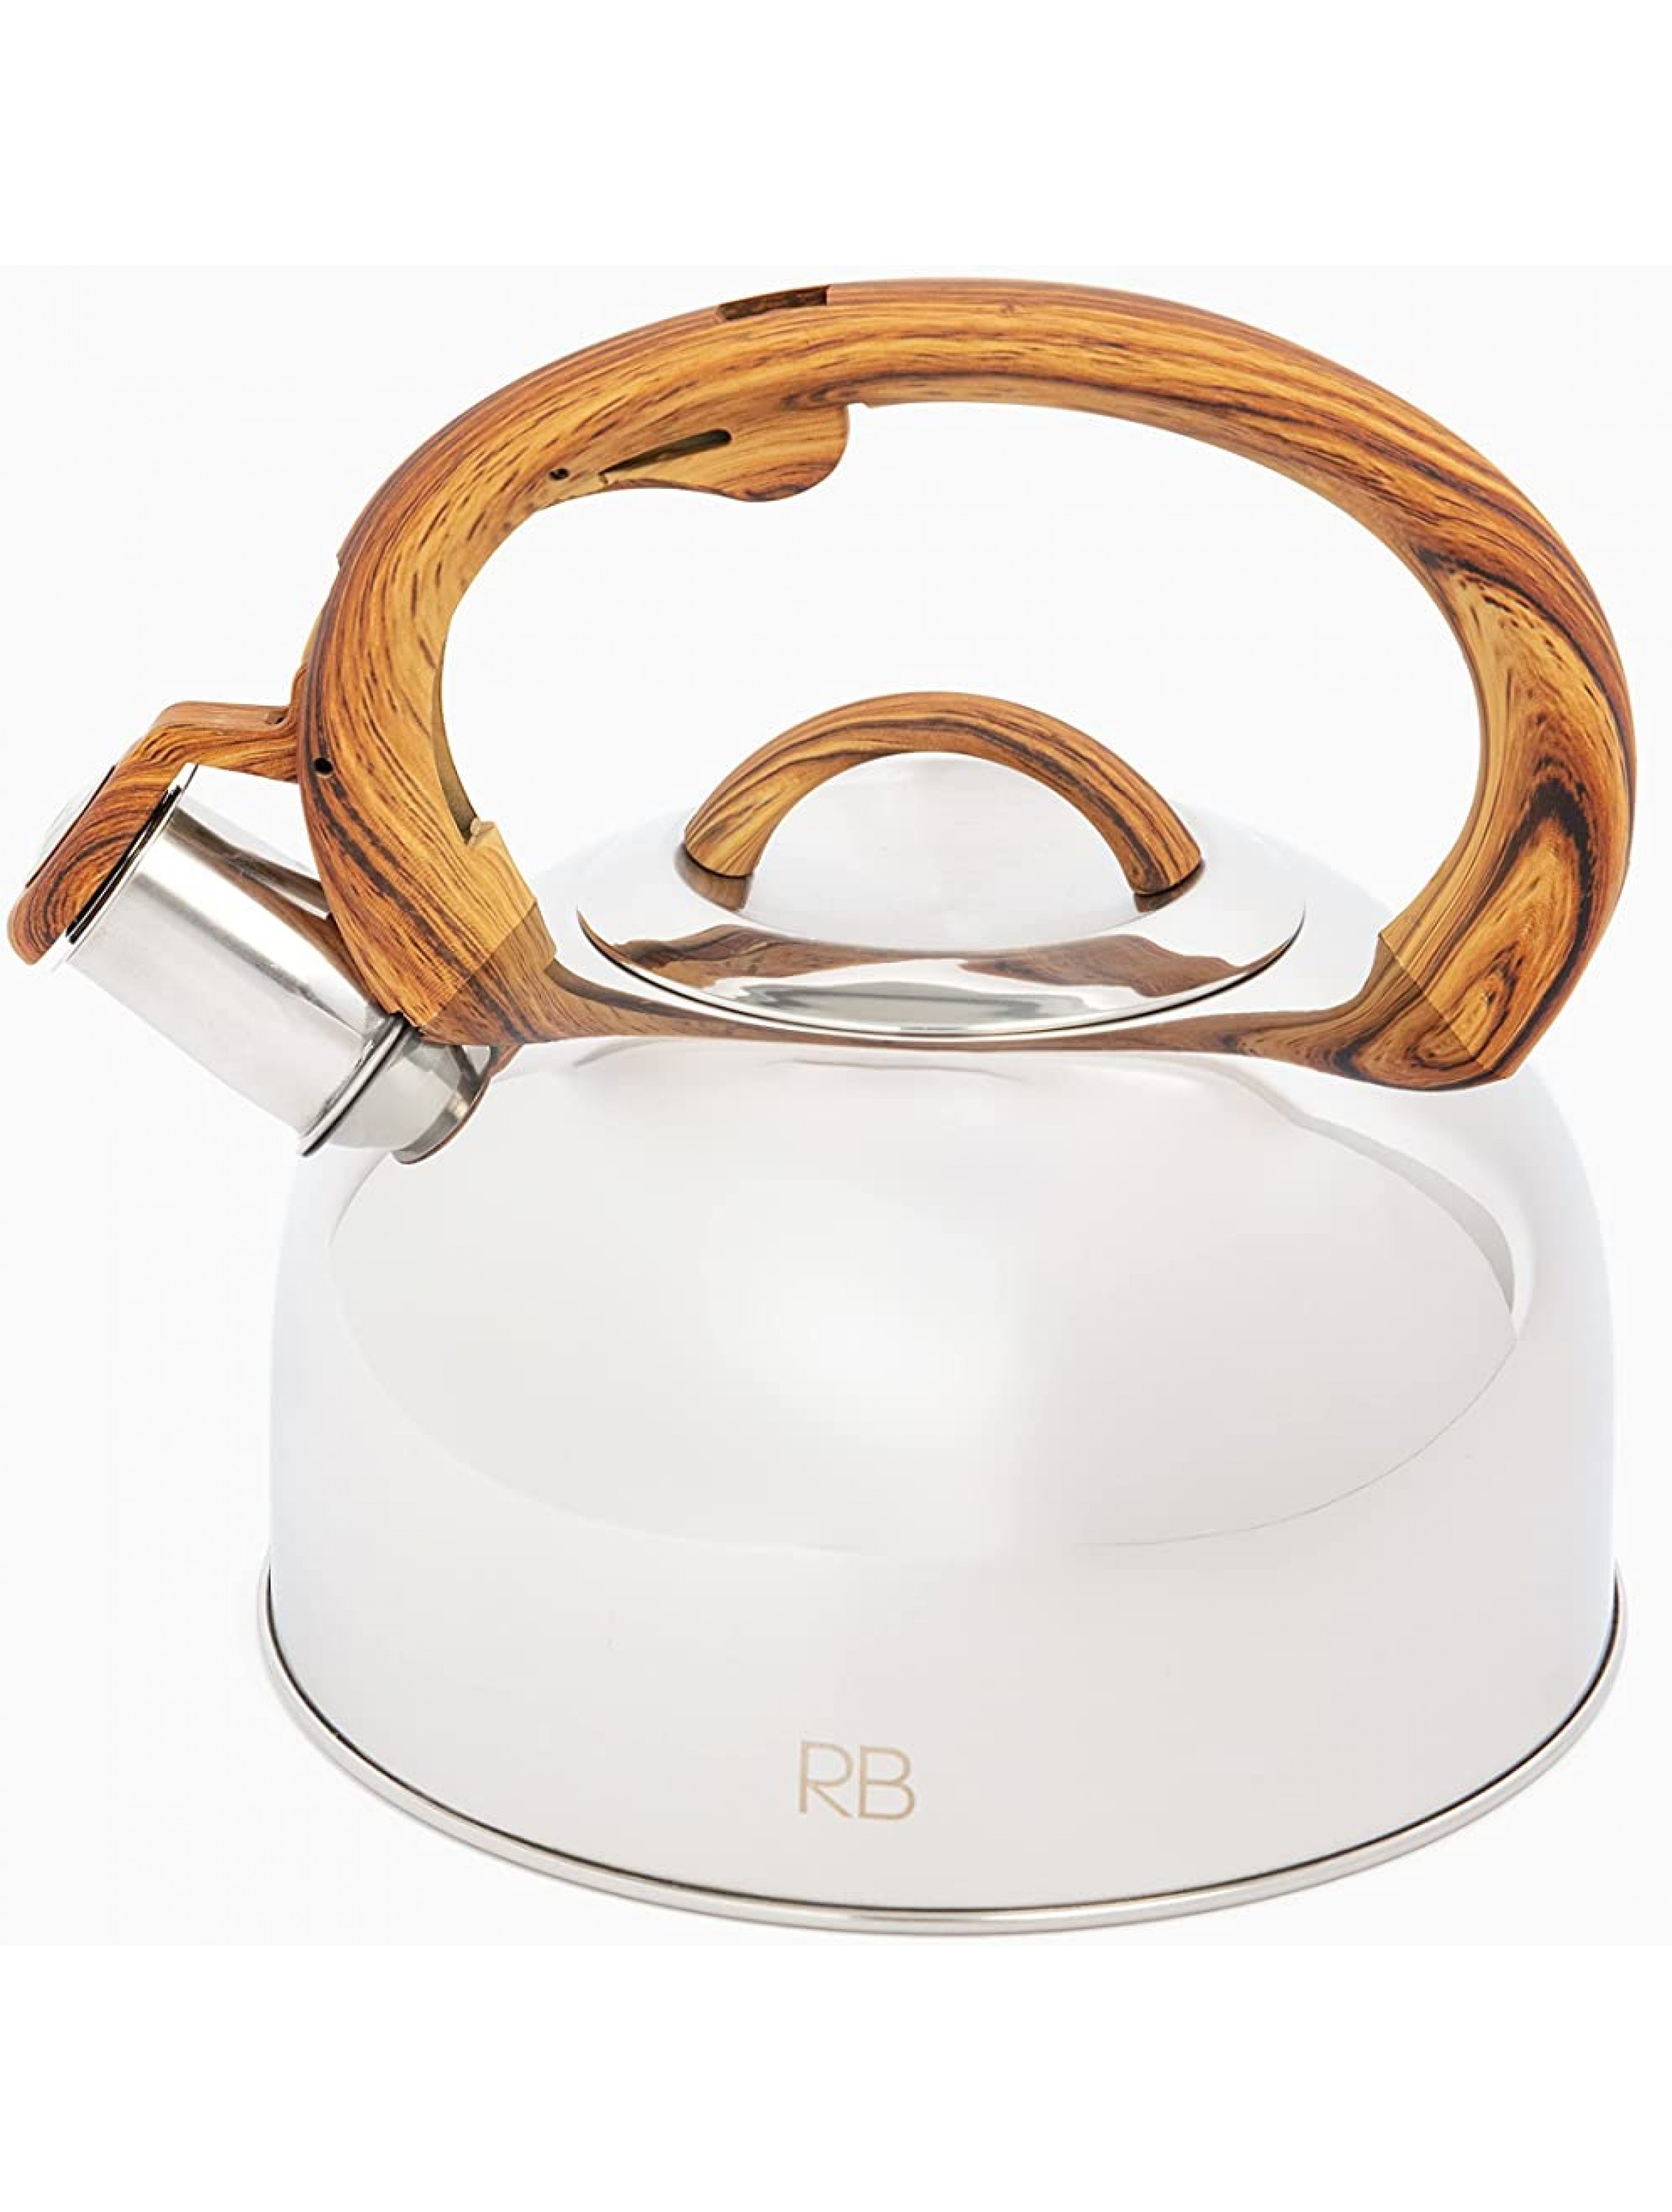 Tea Kettle Stovetop Food-Grade Whistling Tea Kettle with Cool Touch Handle Stainless Steel Tea Kettle with 5-Layered Base that Heats Fast Tea Kettle for Stove Top - BFI7PIUXP